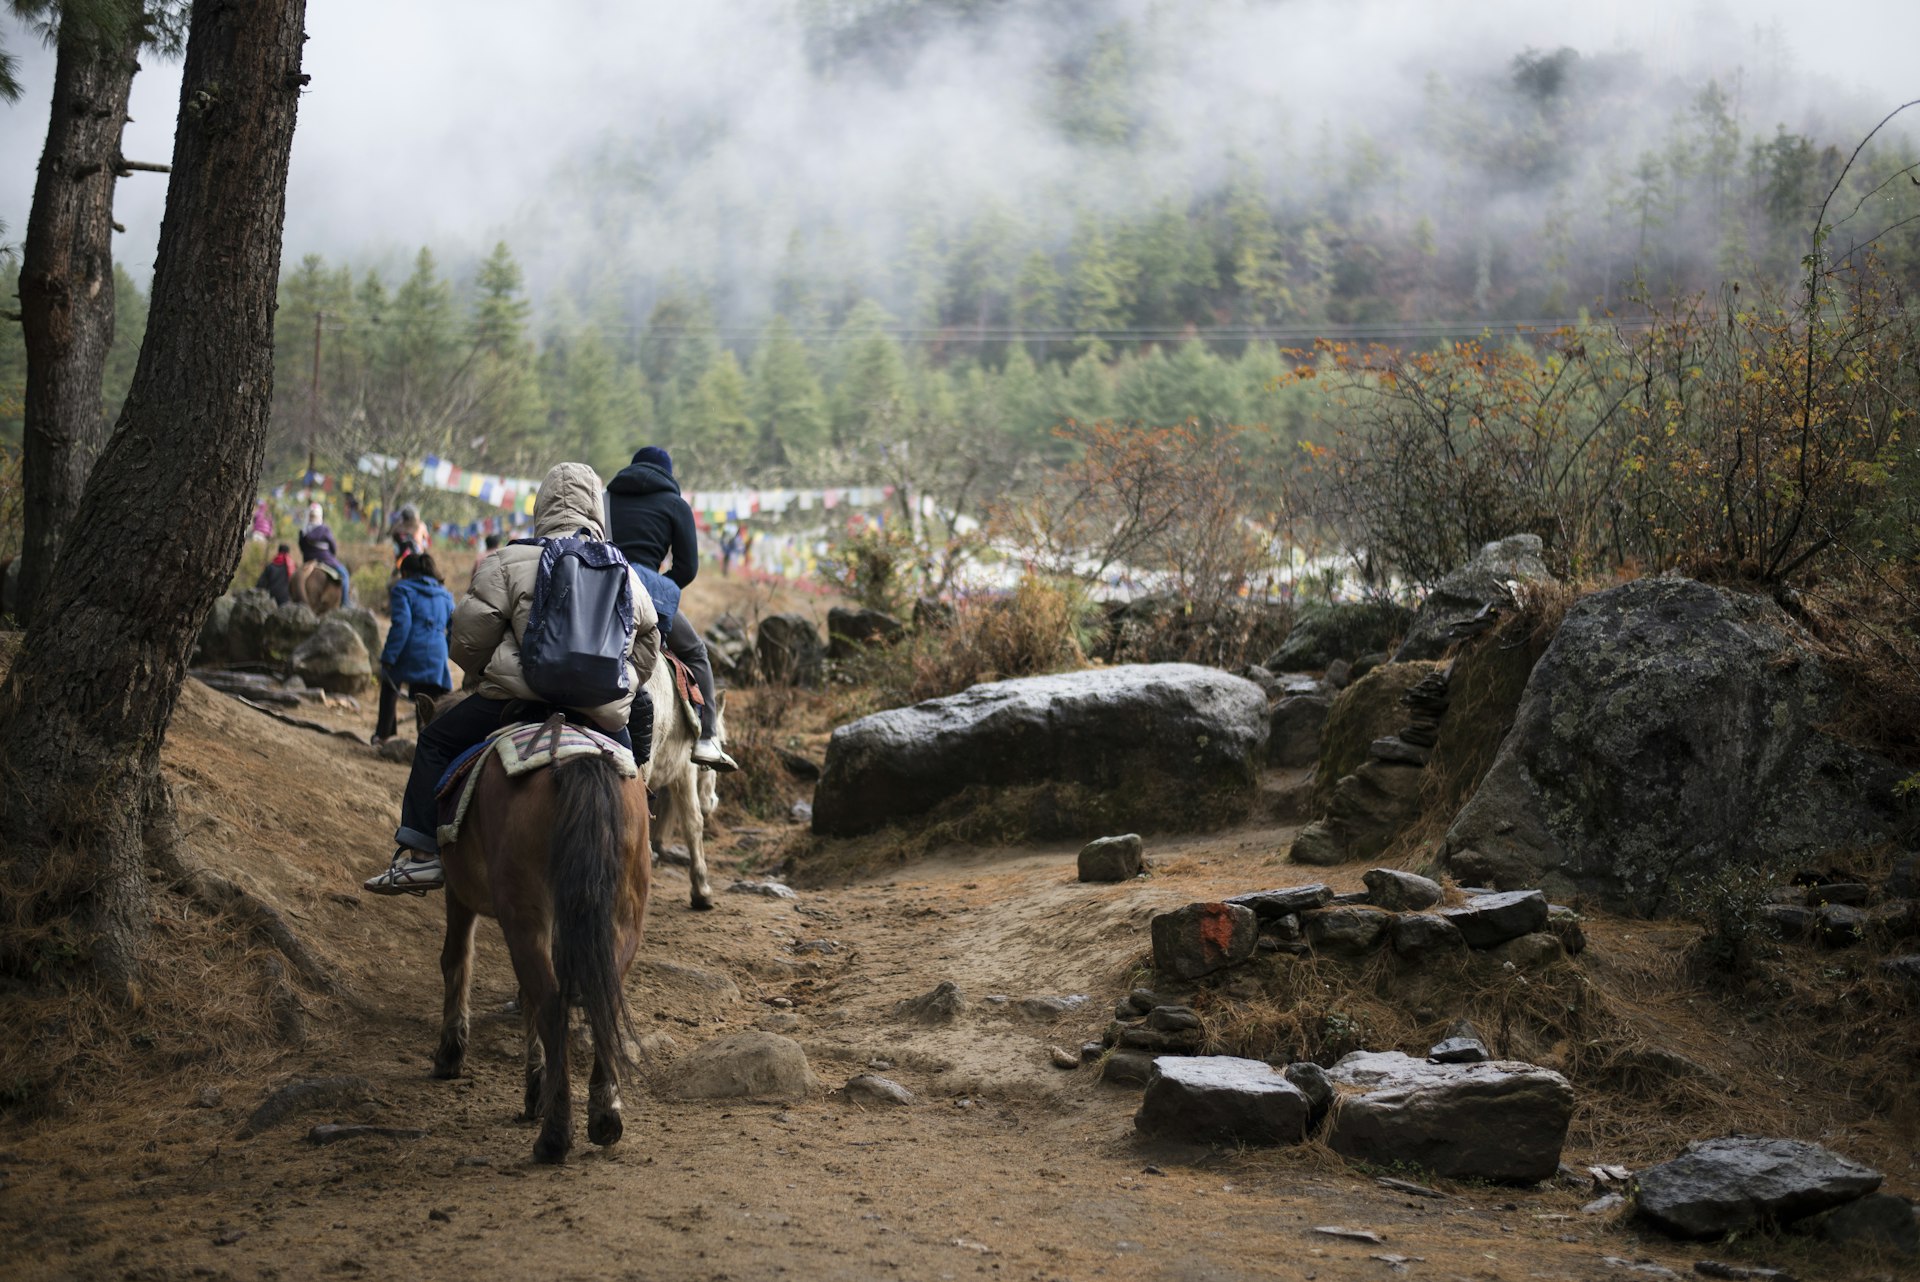 People traveling to Taktshang Goemba by horse